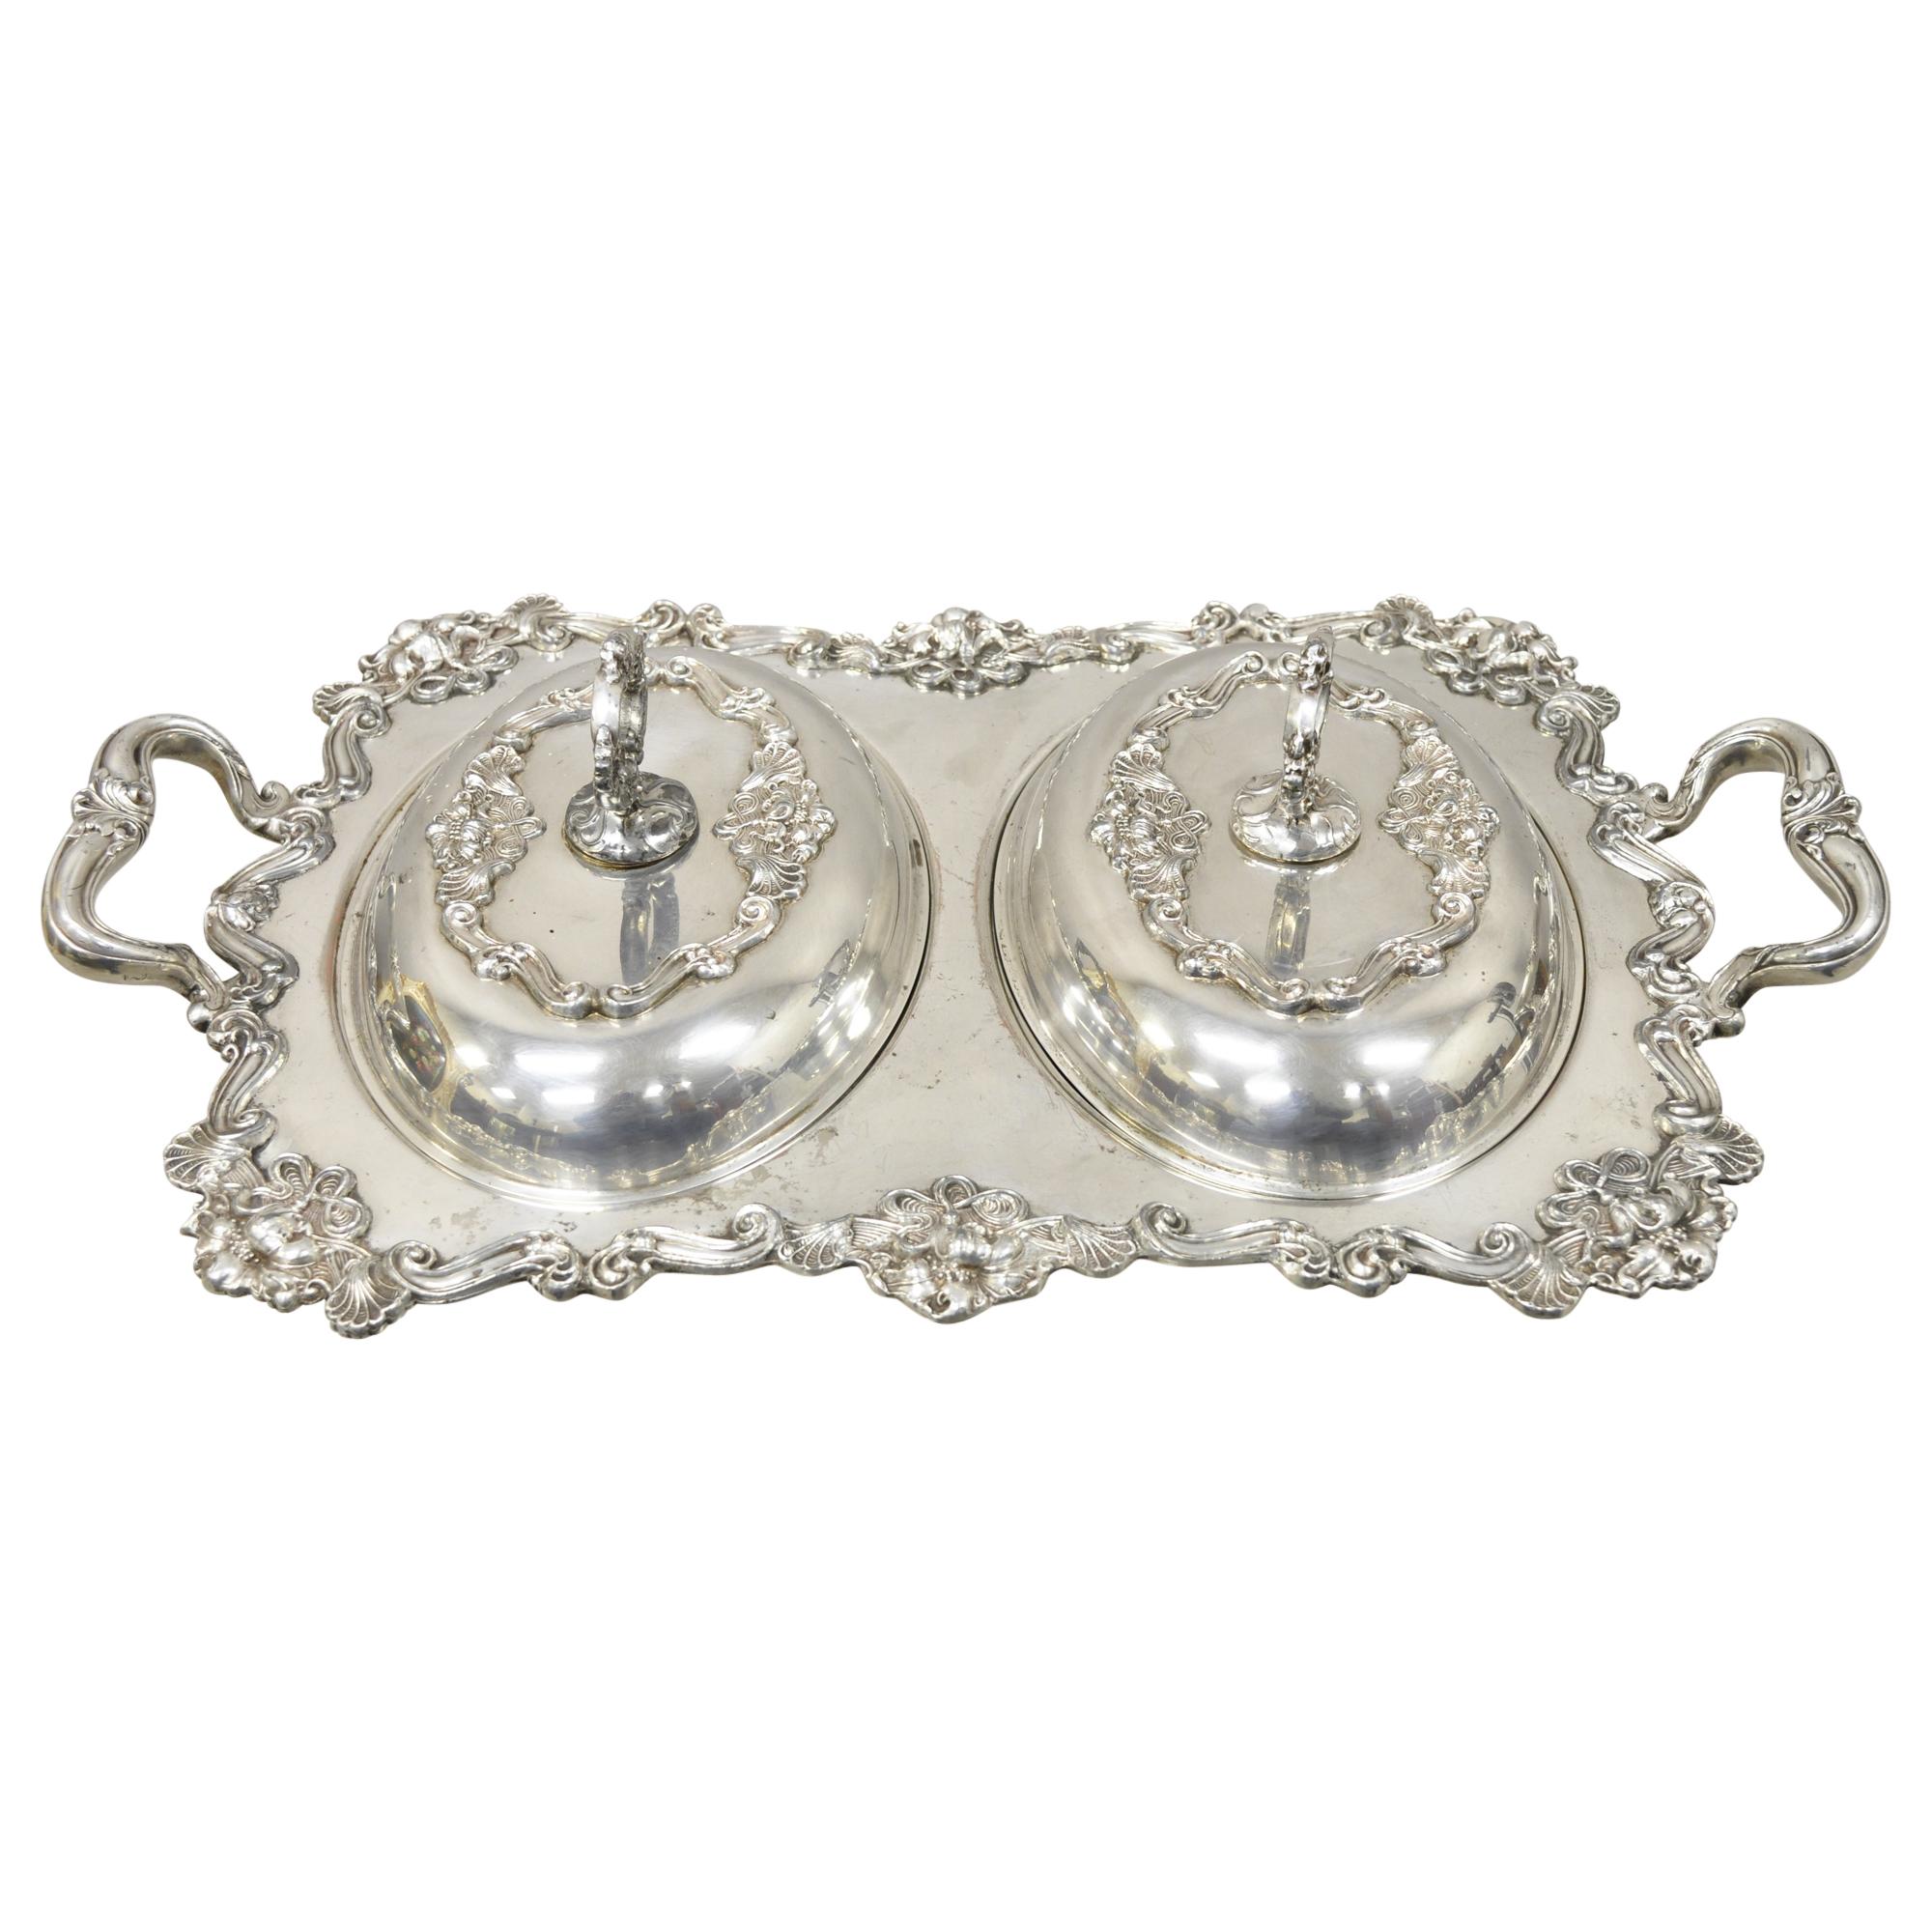 French Art Nouveau Silver Plate Double Side Serving Dish Platter Tray with Lids